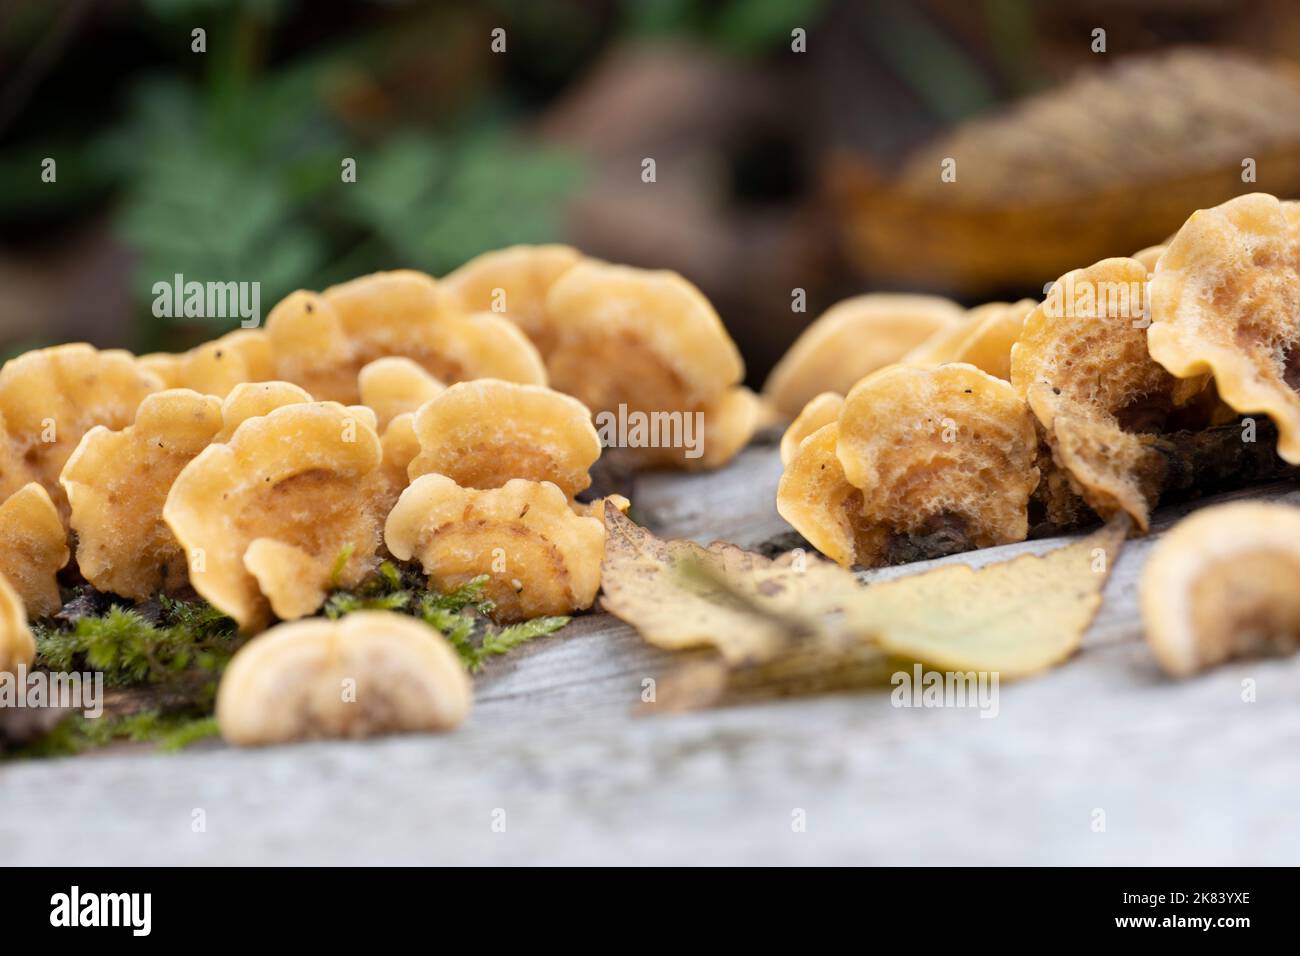 Striegeliger layer fungus, tree fungus on the wood trunk Stock Photo